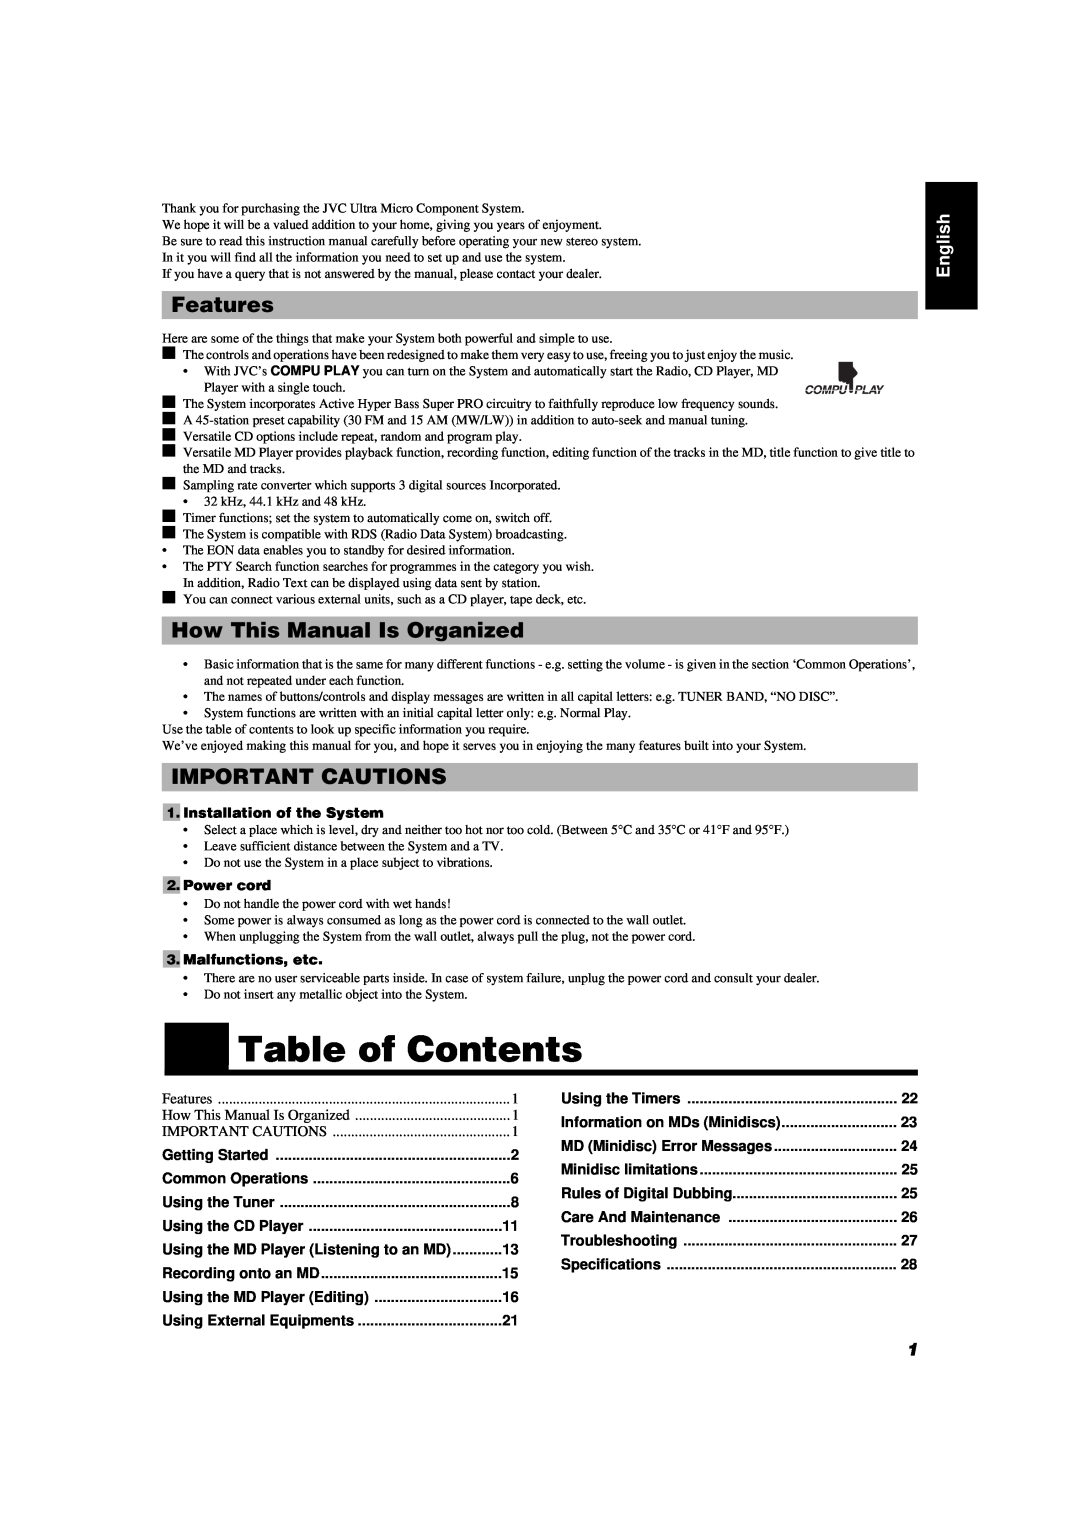 JVC UX-MD9000R manual Table of Contents, Features, How This Manual Is Organized, Important Cautions, English, Power cord 